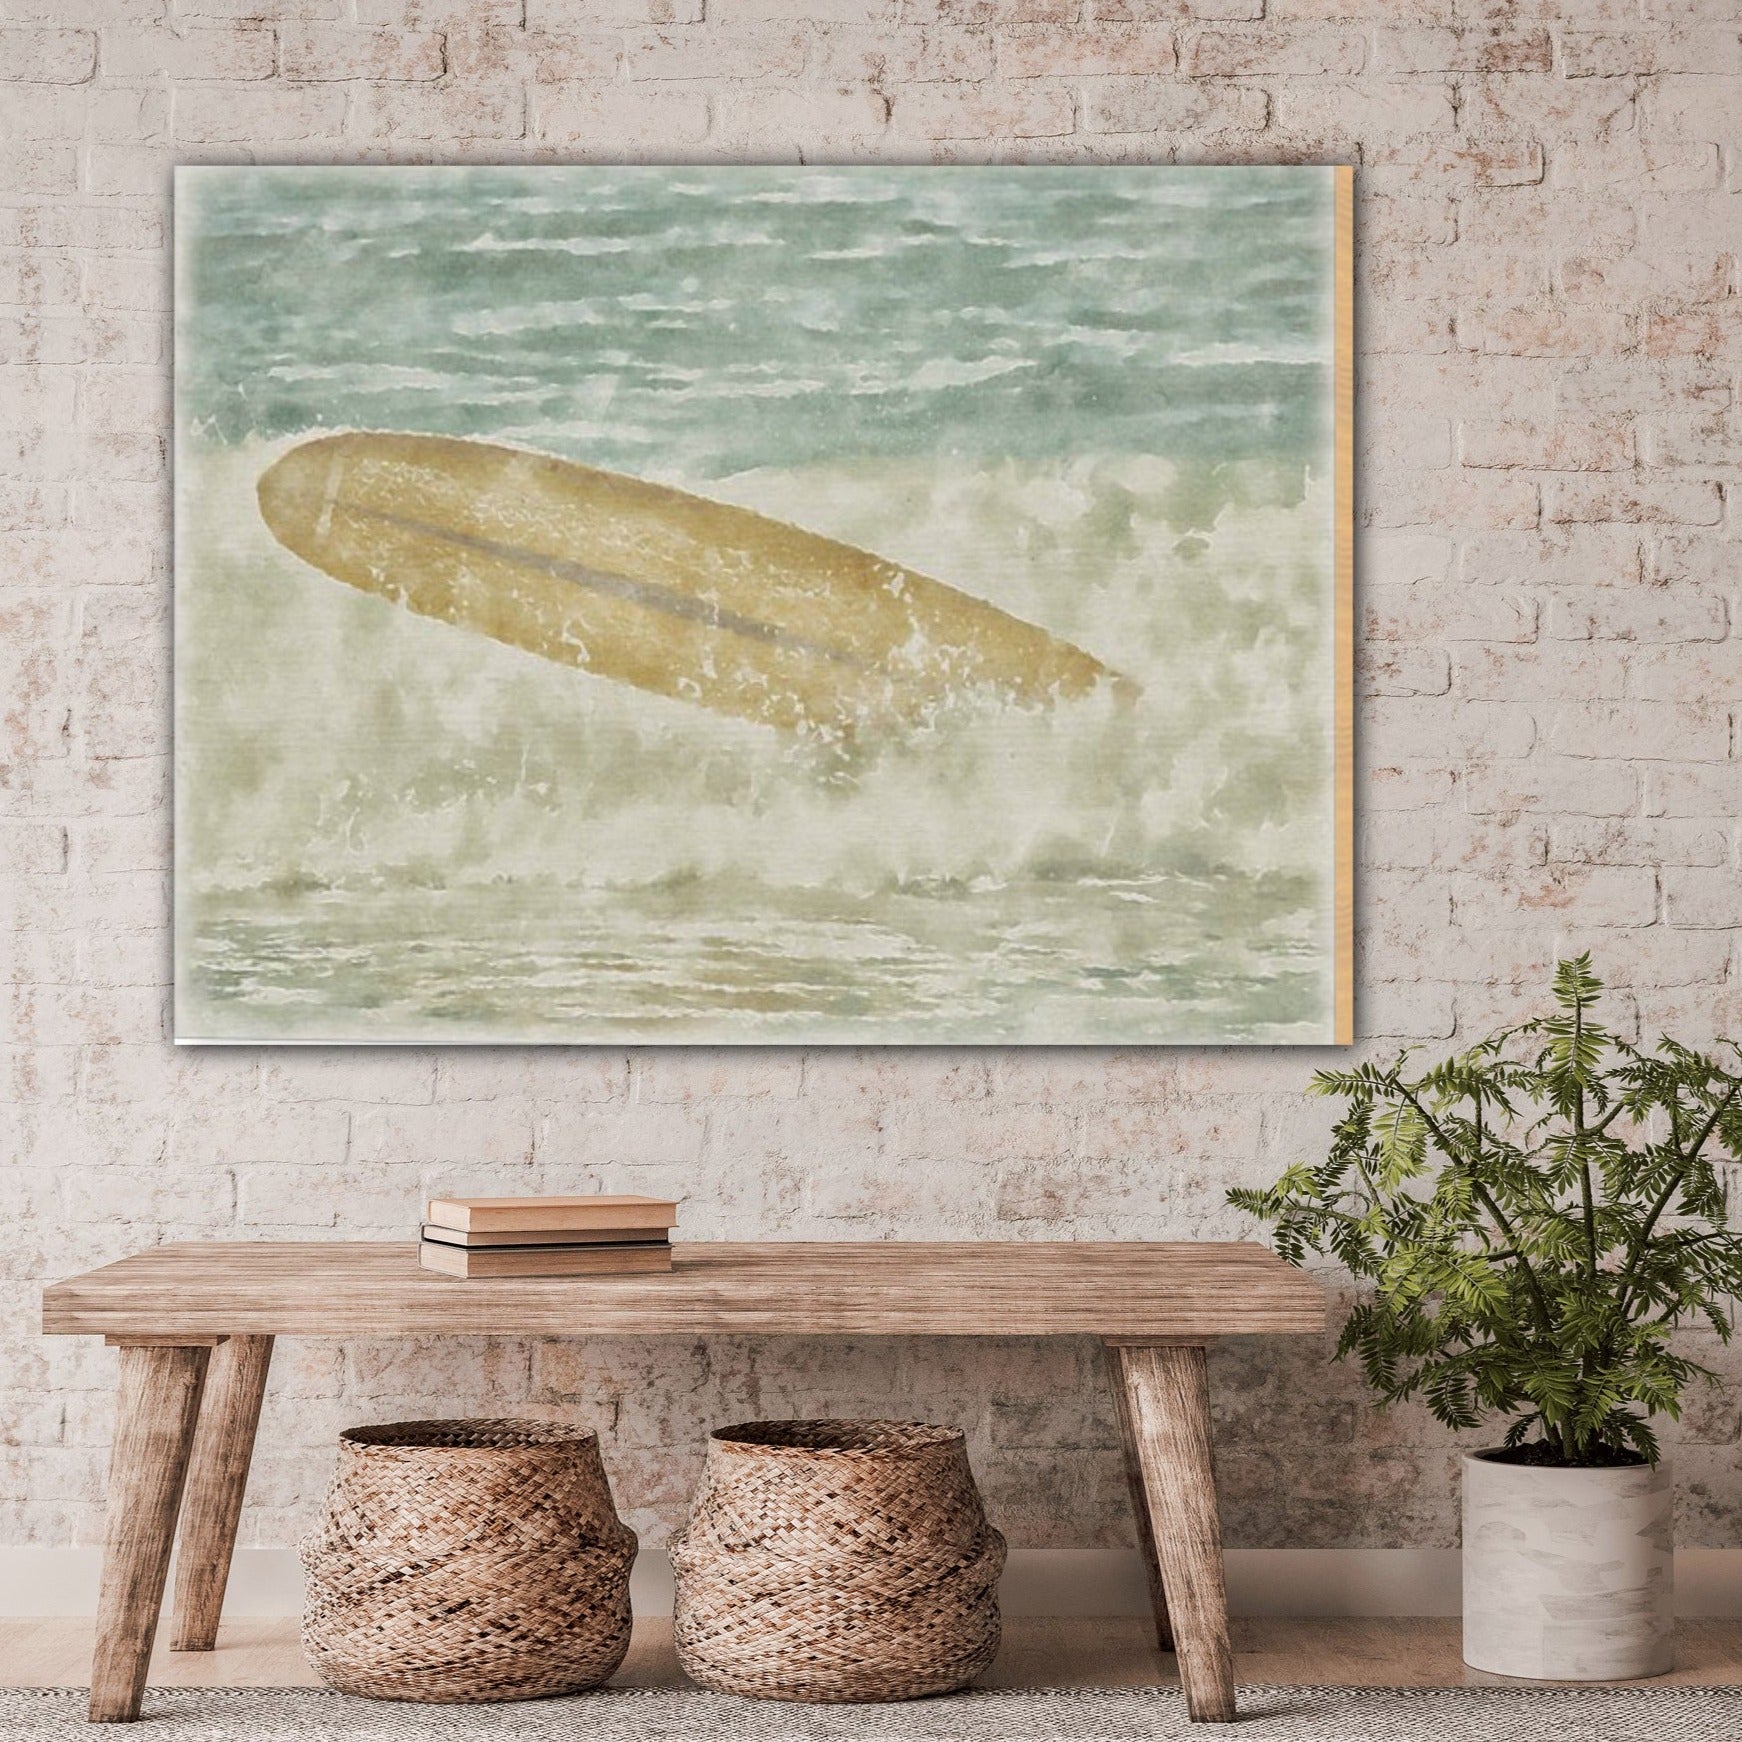 runaway surfboard wood print home decor by jacqueline mb designs 